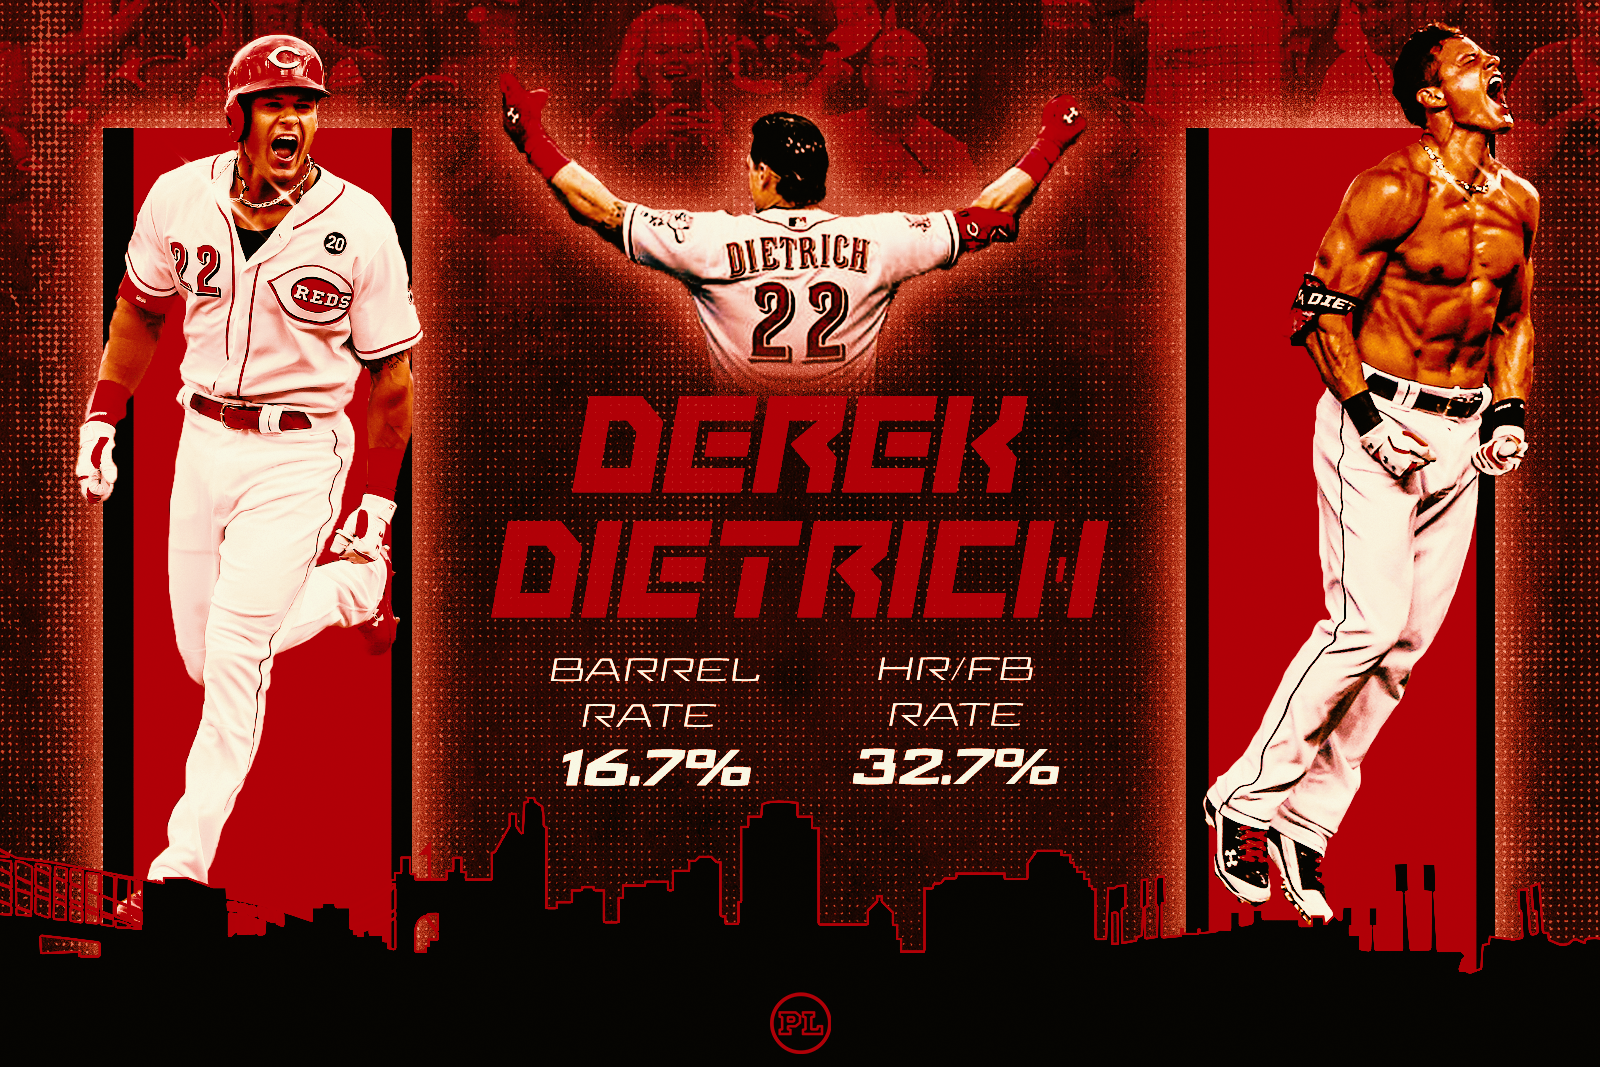 Going Deep: Derek Dietrich and the Magic of Launch Angle